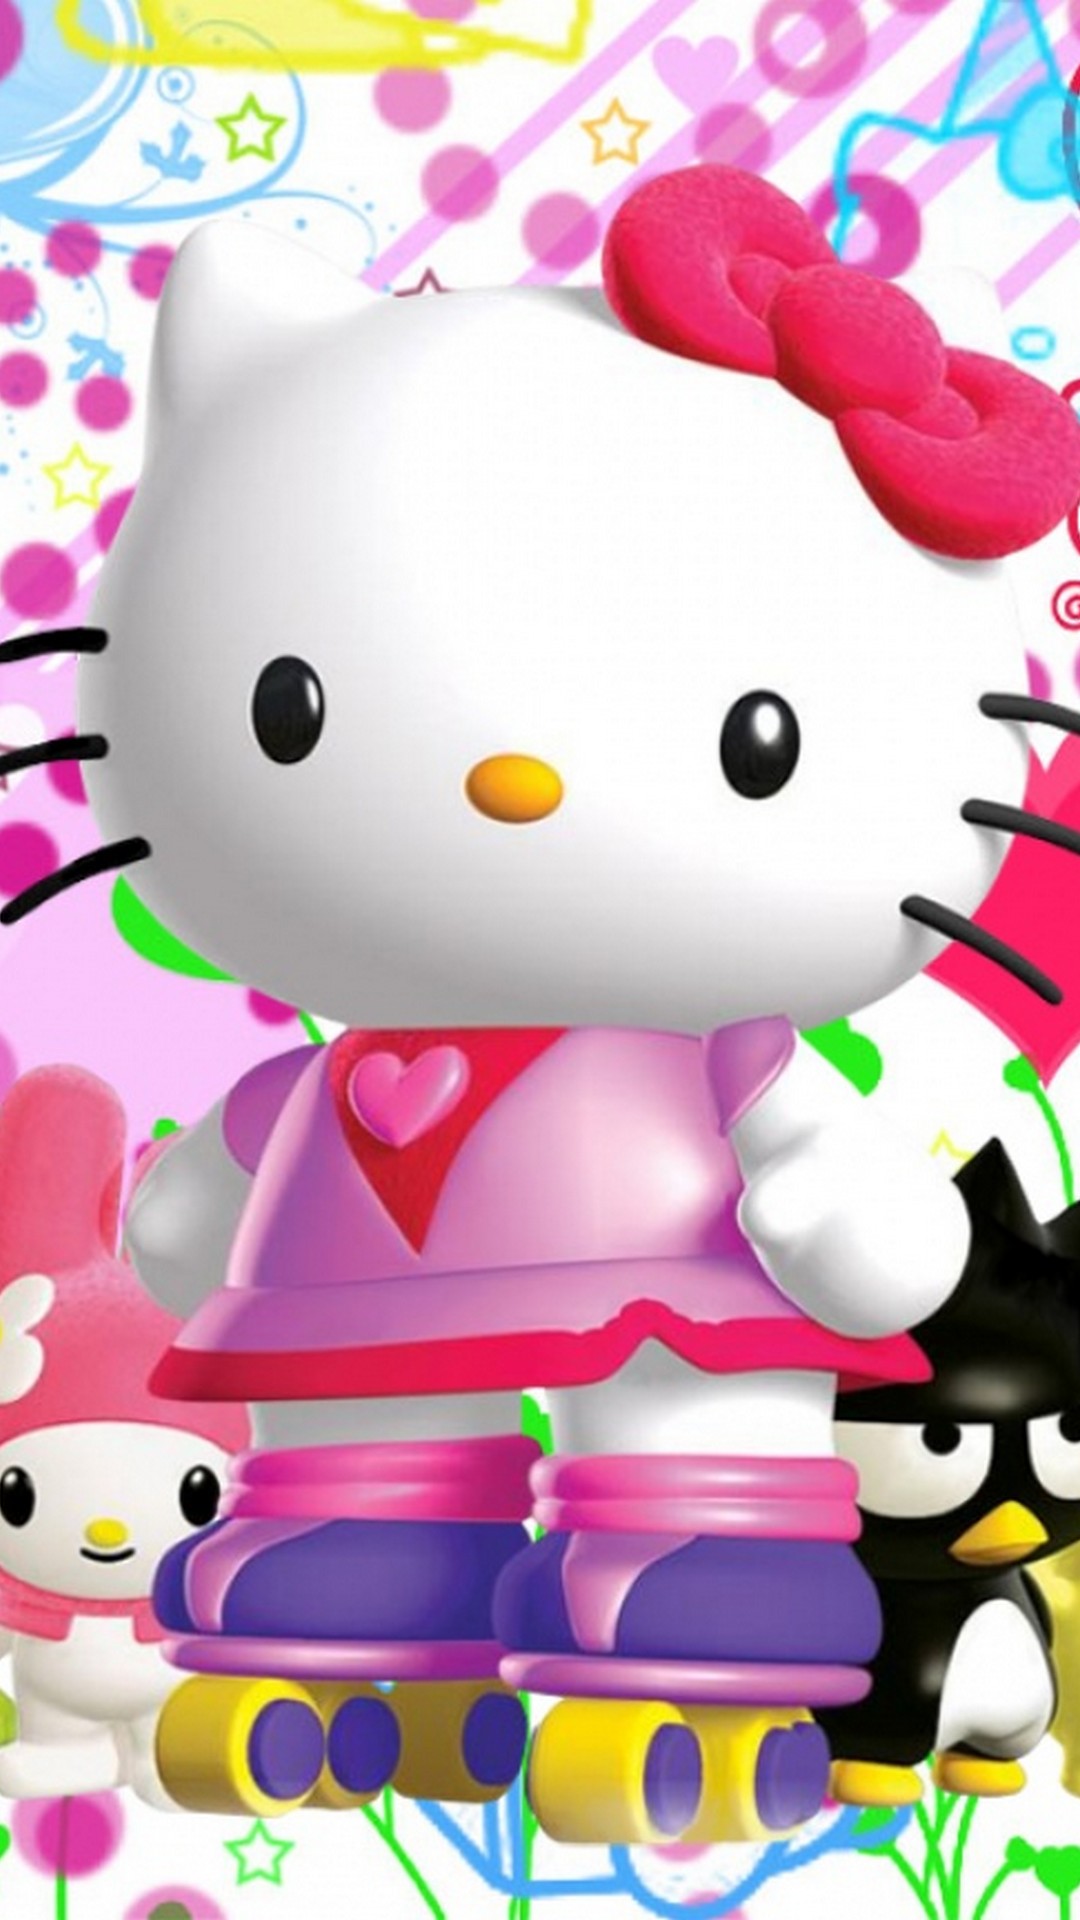 Hello Kitty Pictures Android Wallpaper with image resolution 1080x1920 pixel. You can make this wallpaper for your Android backgrounds, Tablet, Smartphones Screensavers and Mobile Phone Lock Screen